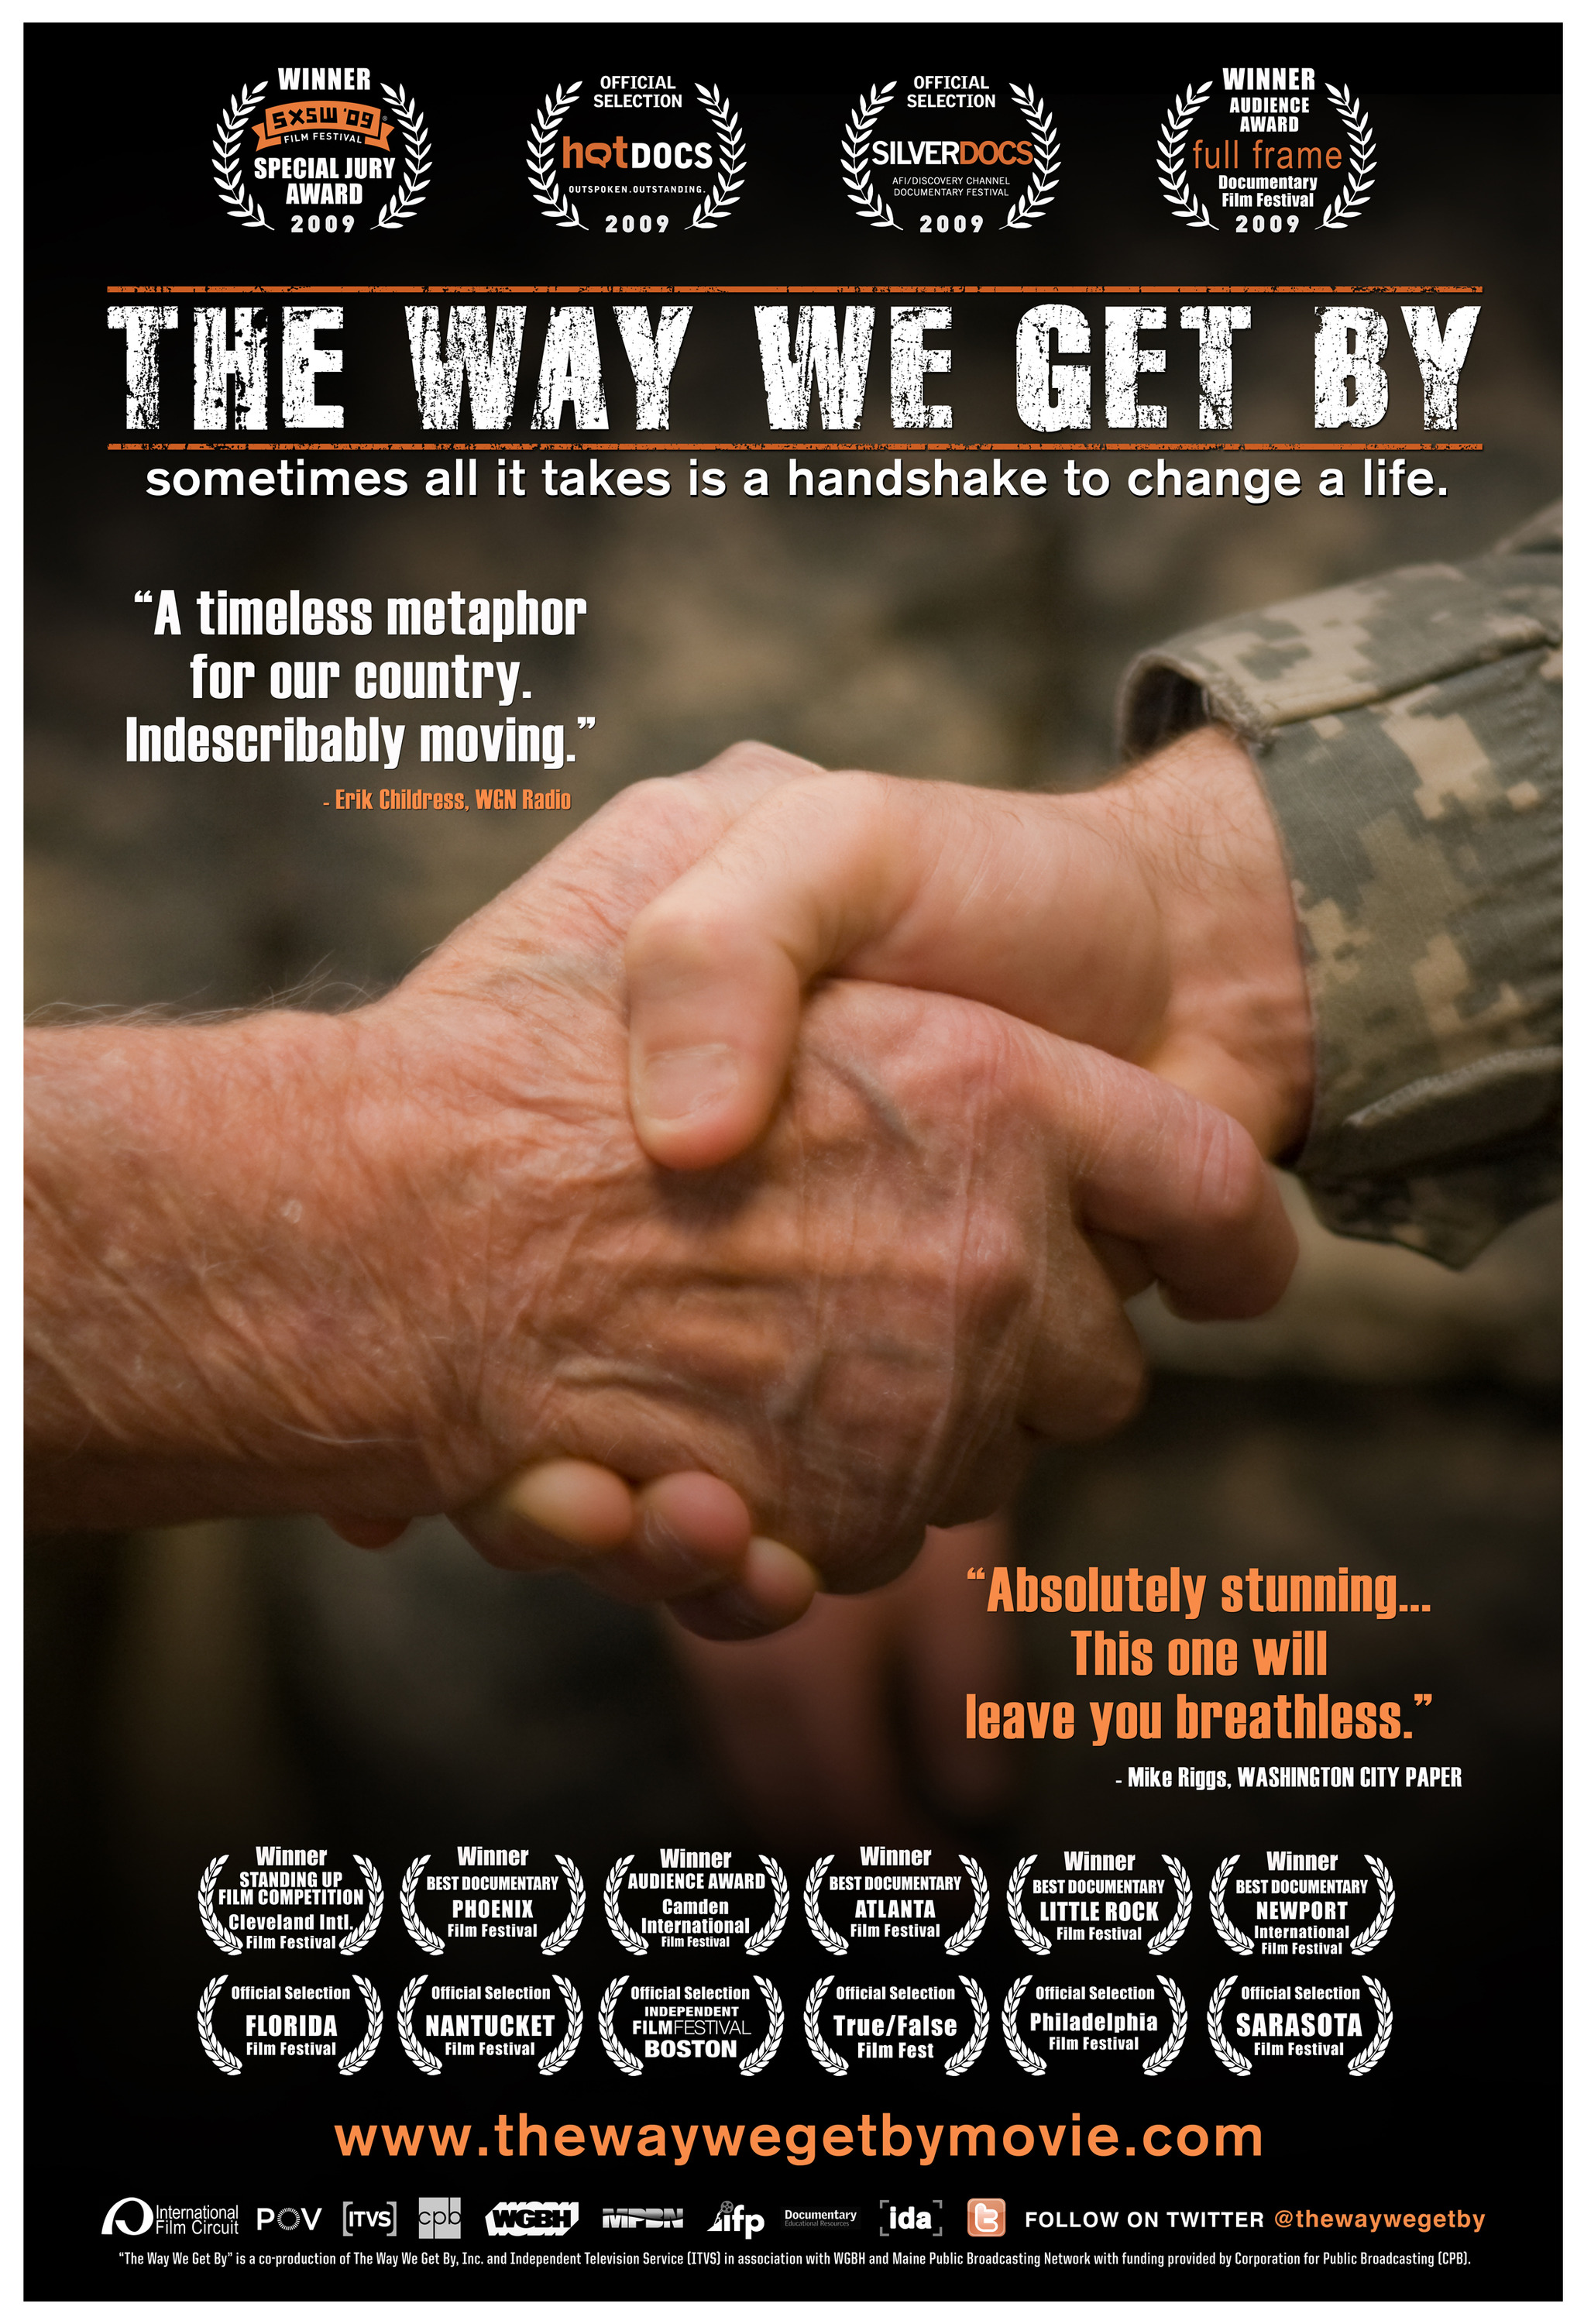 Mega Sized Movie Poster Image for The Way We Get By 